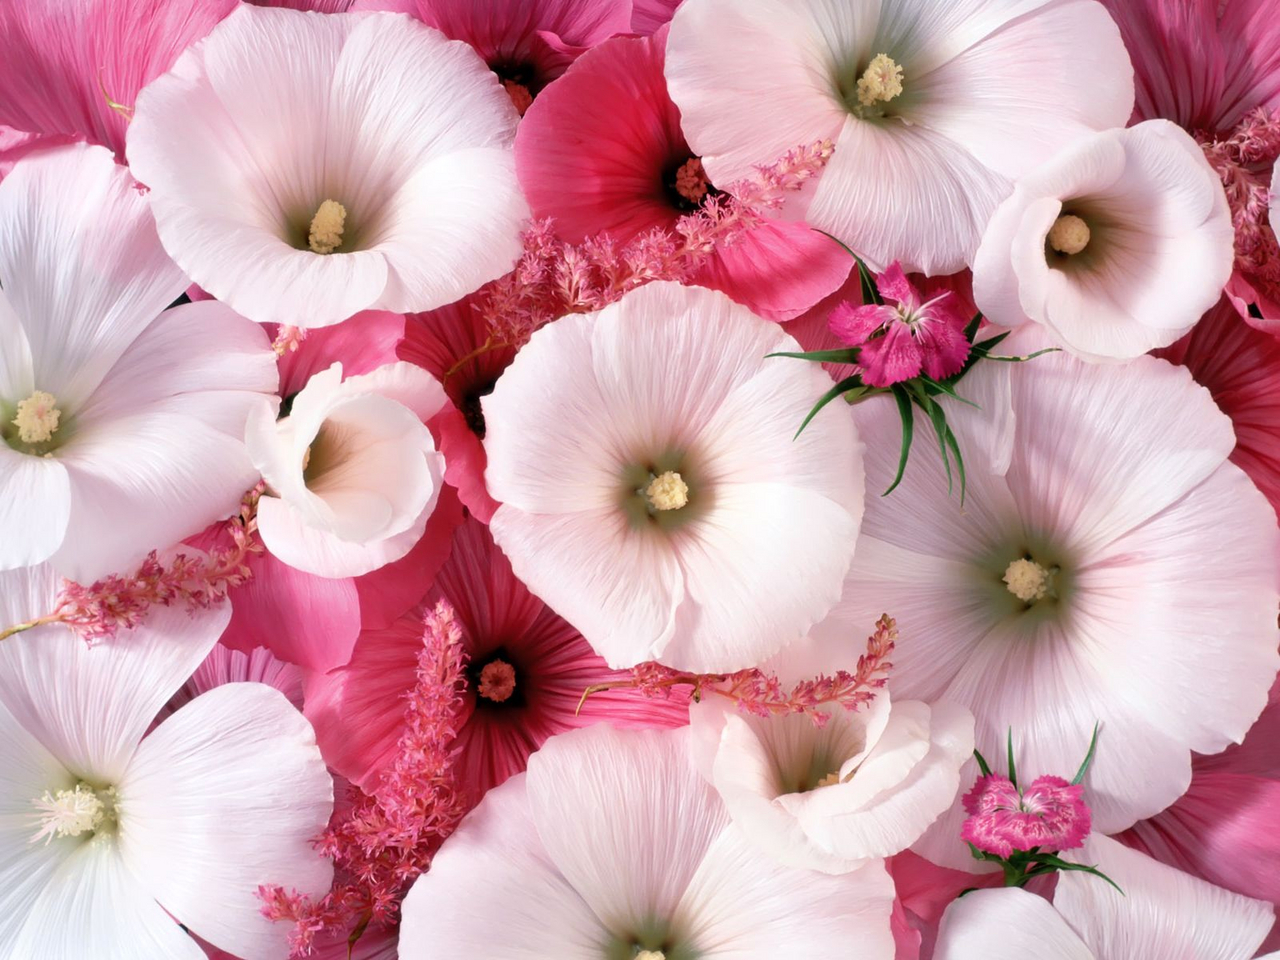 HD Flowers Widescreen Wallpapers ~ High Definition Wallpapers|Cool